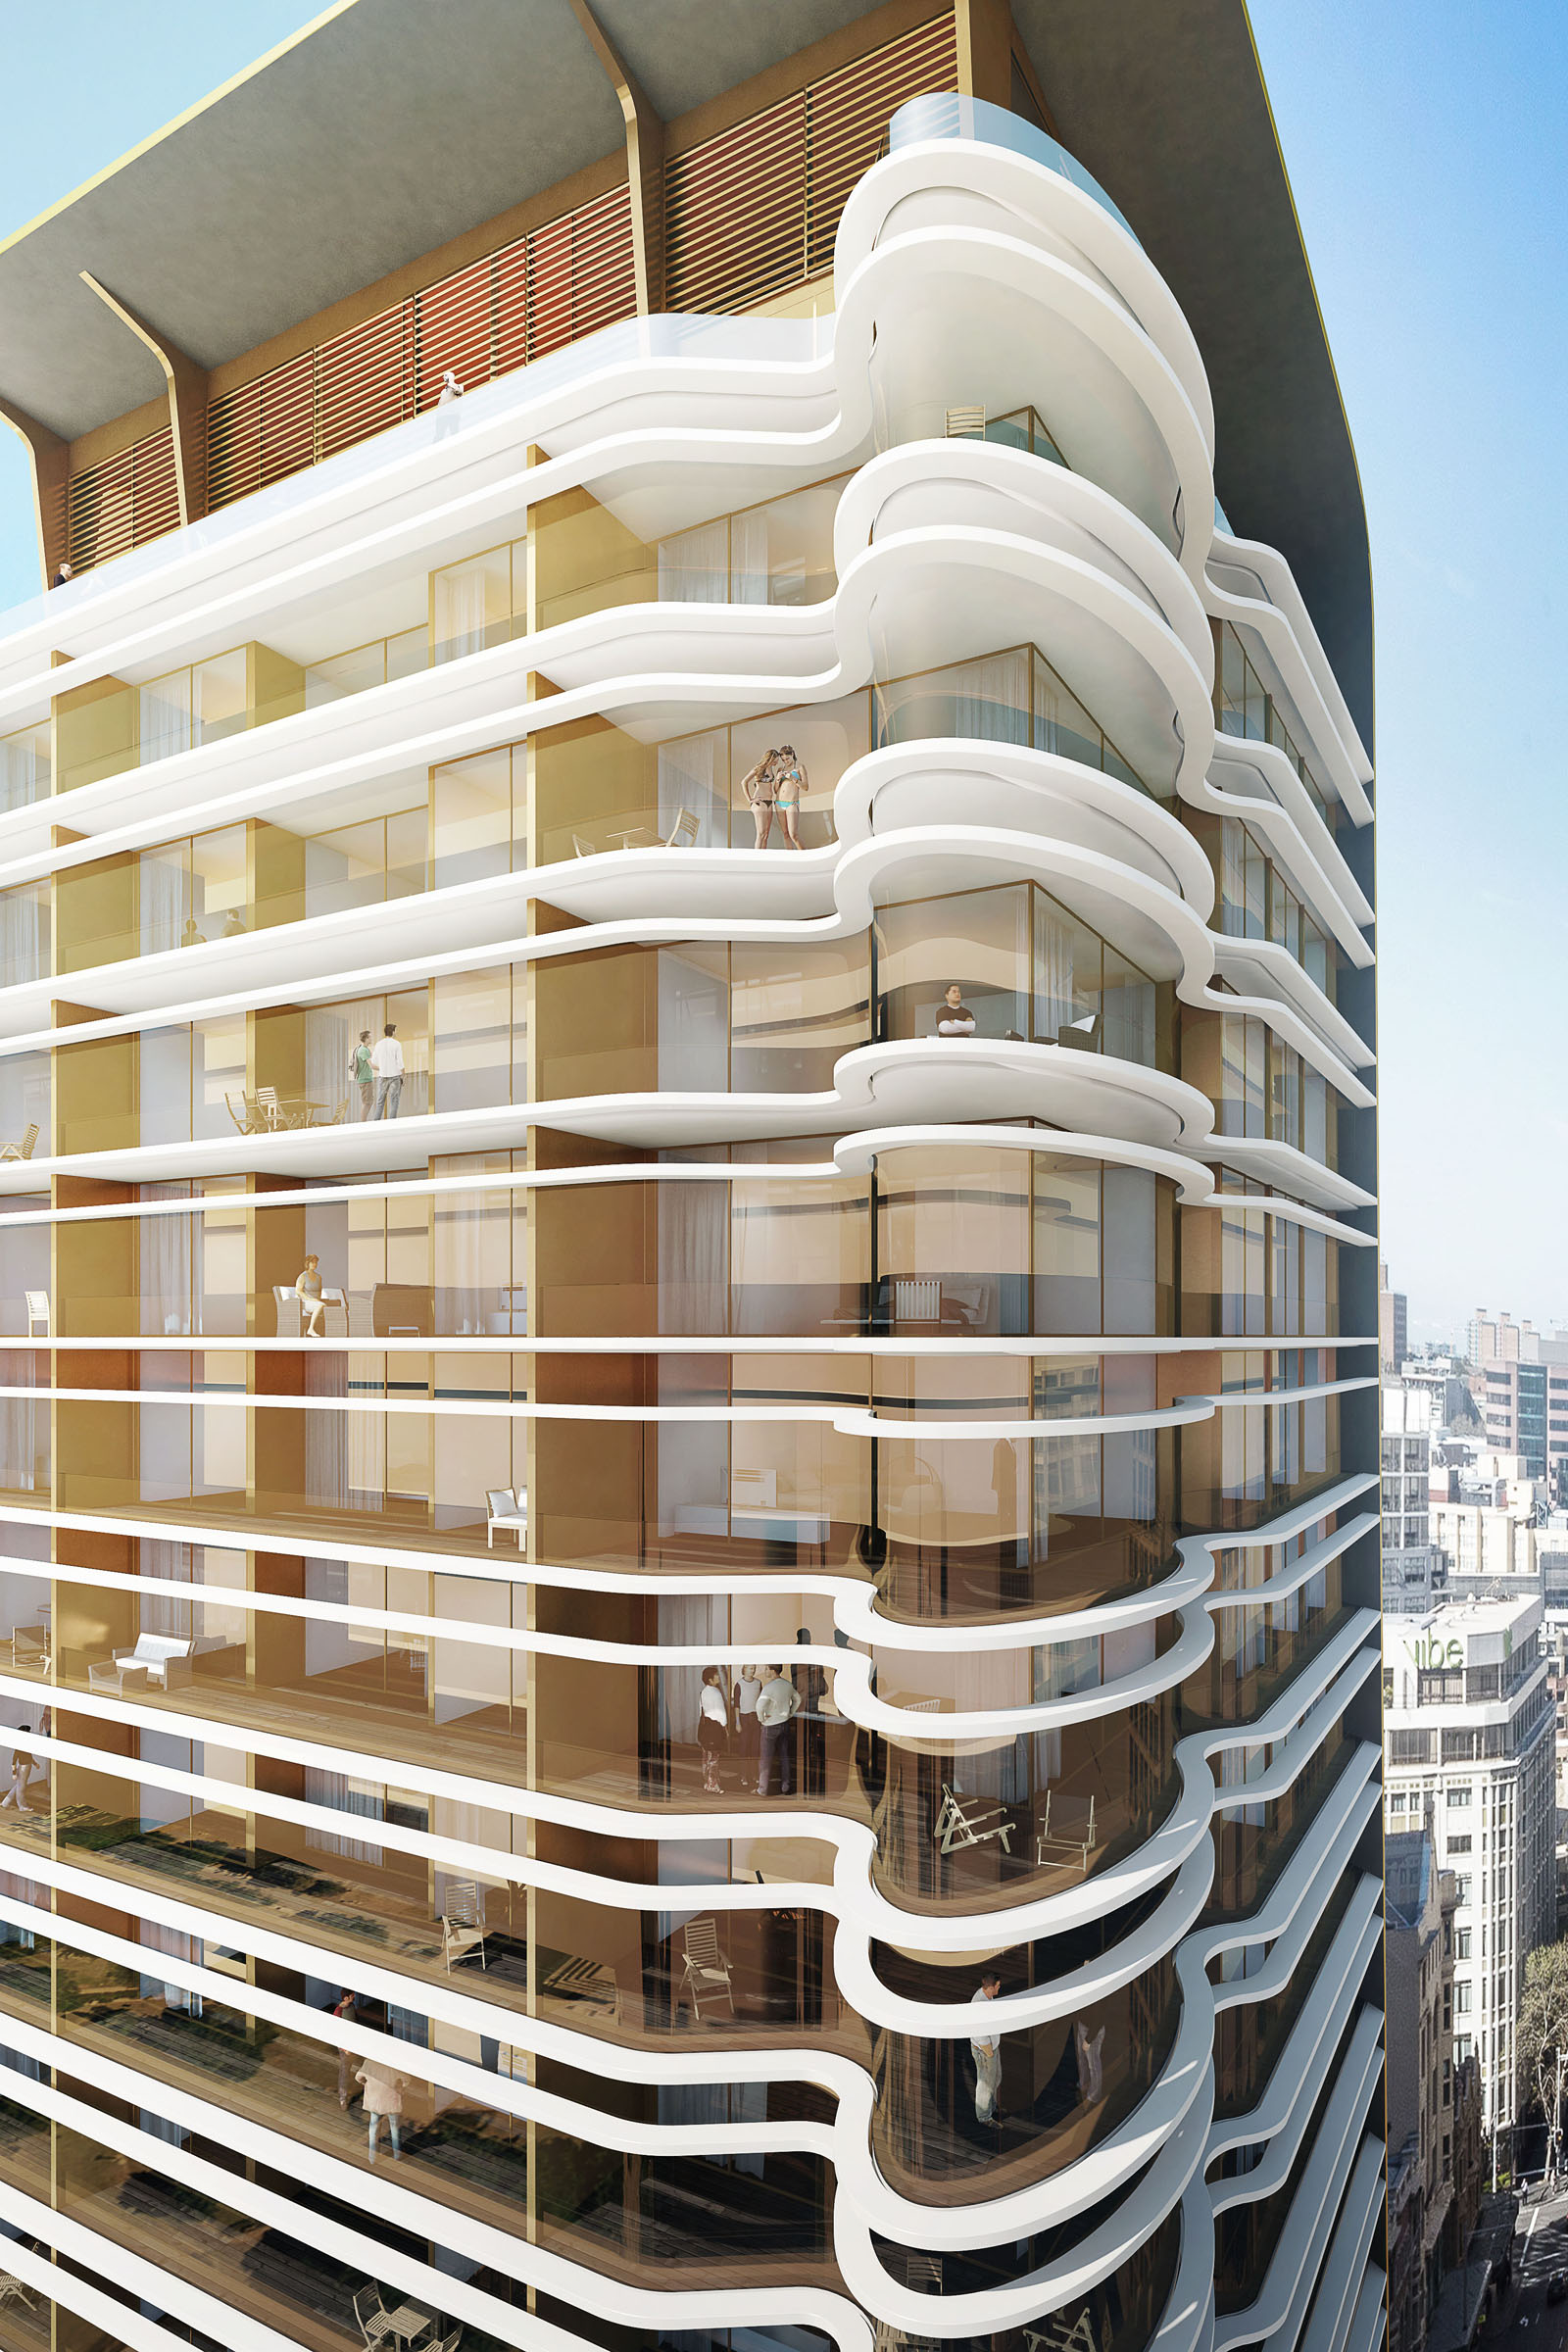 Sydney's Latest Residential Towers' designs